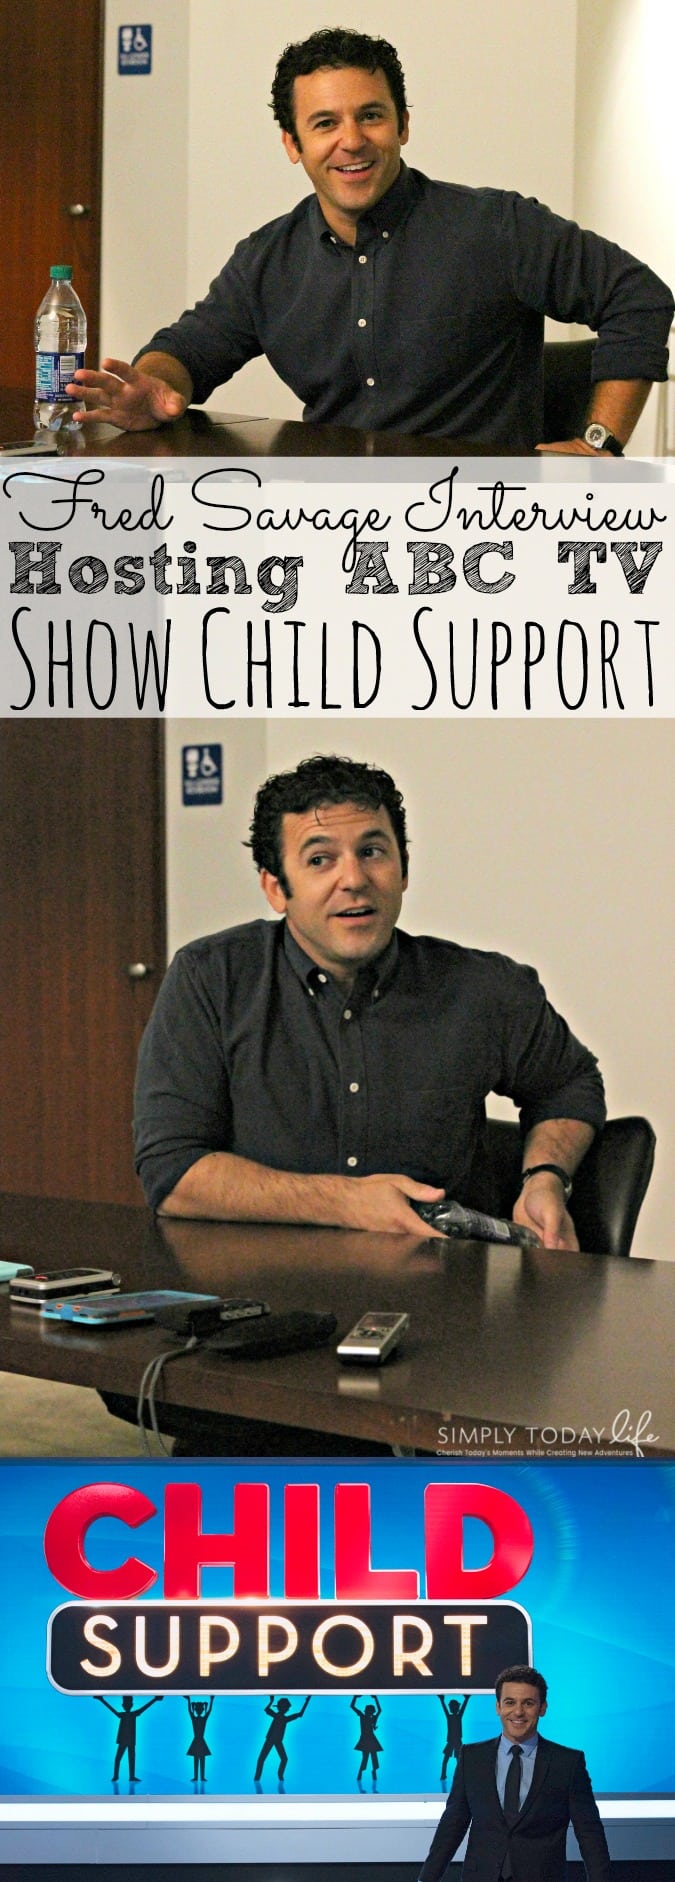 Interview with Fred Savage